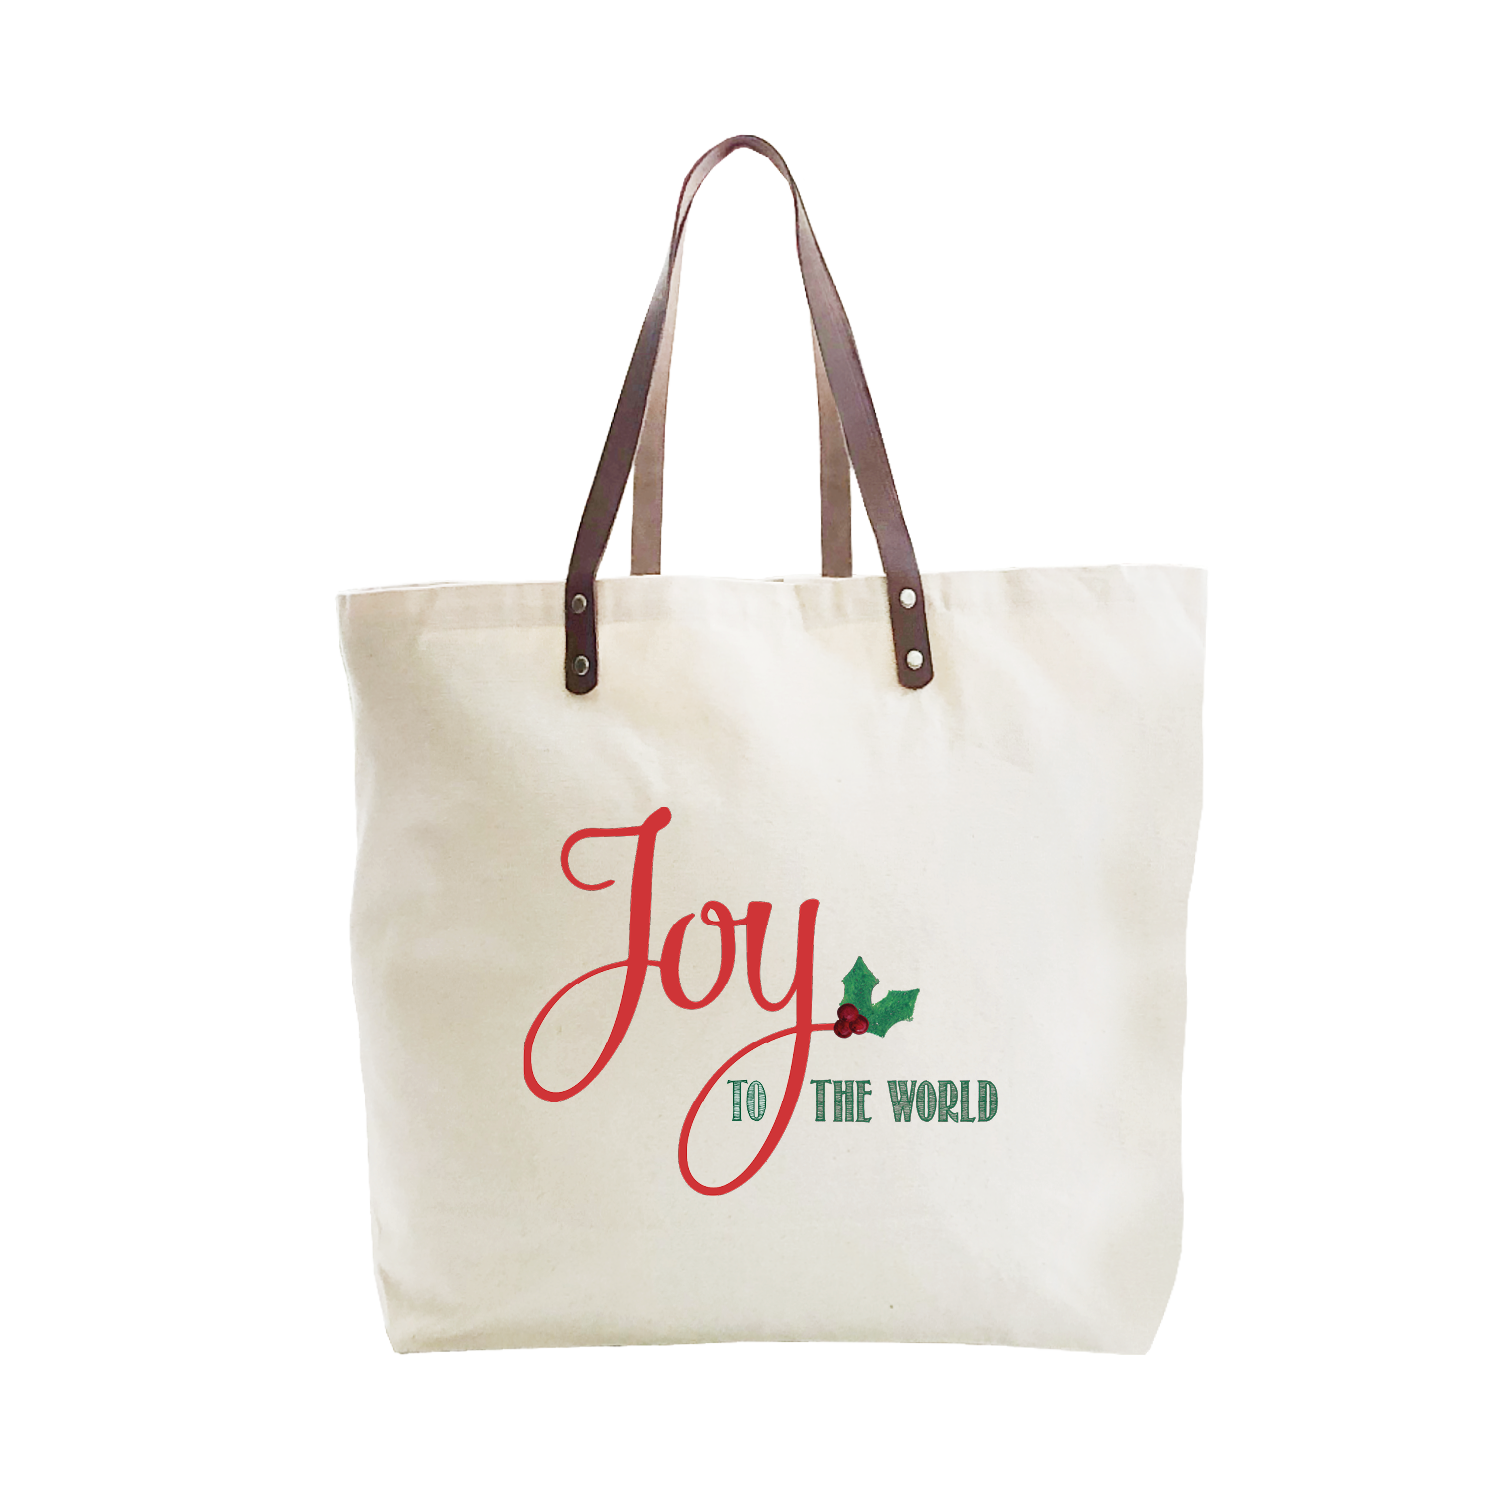 joy to the world large tote